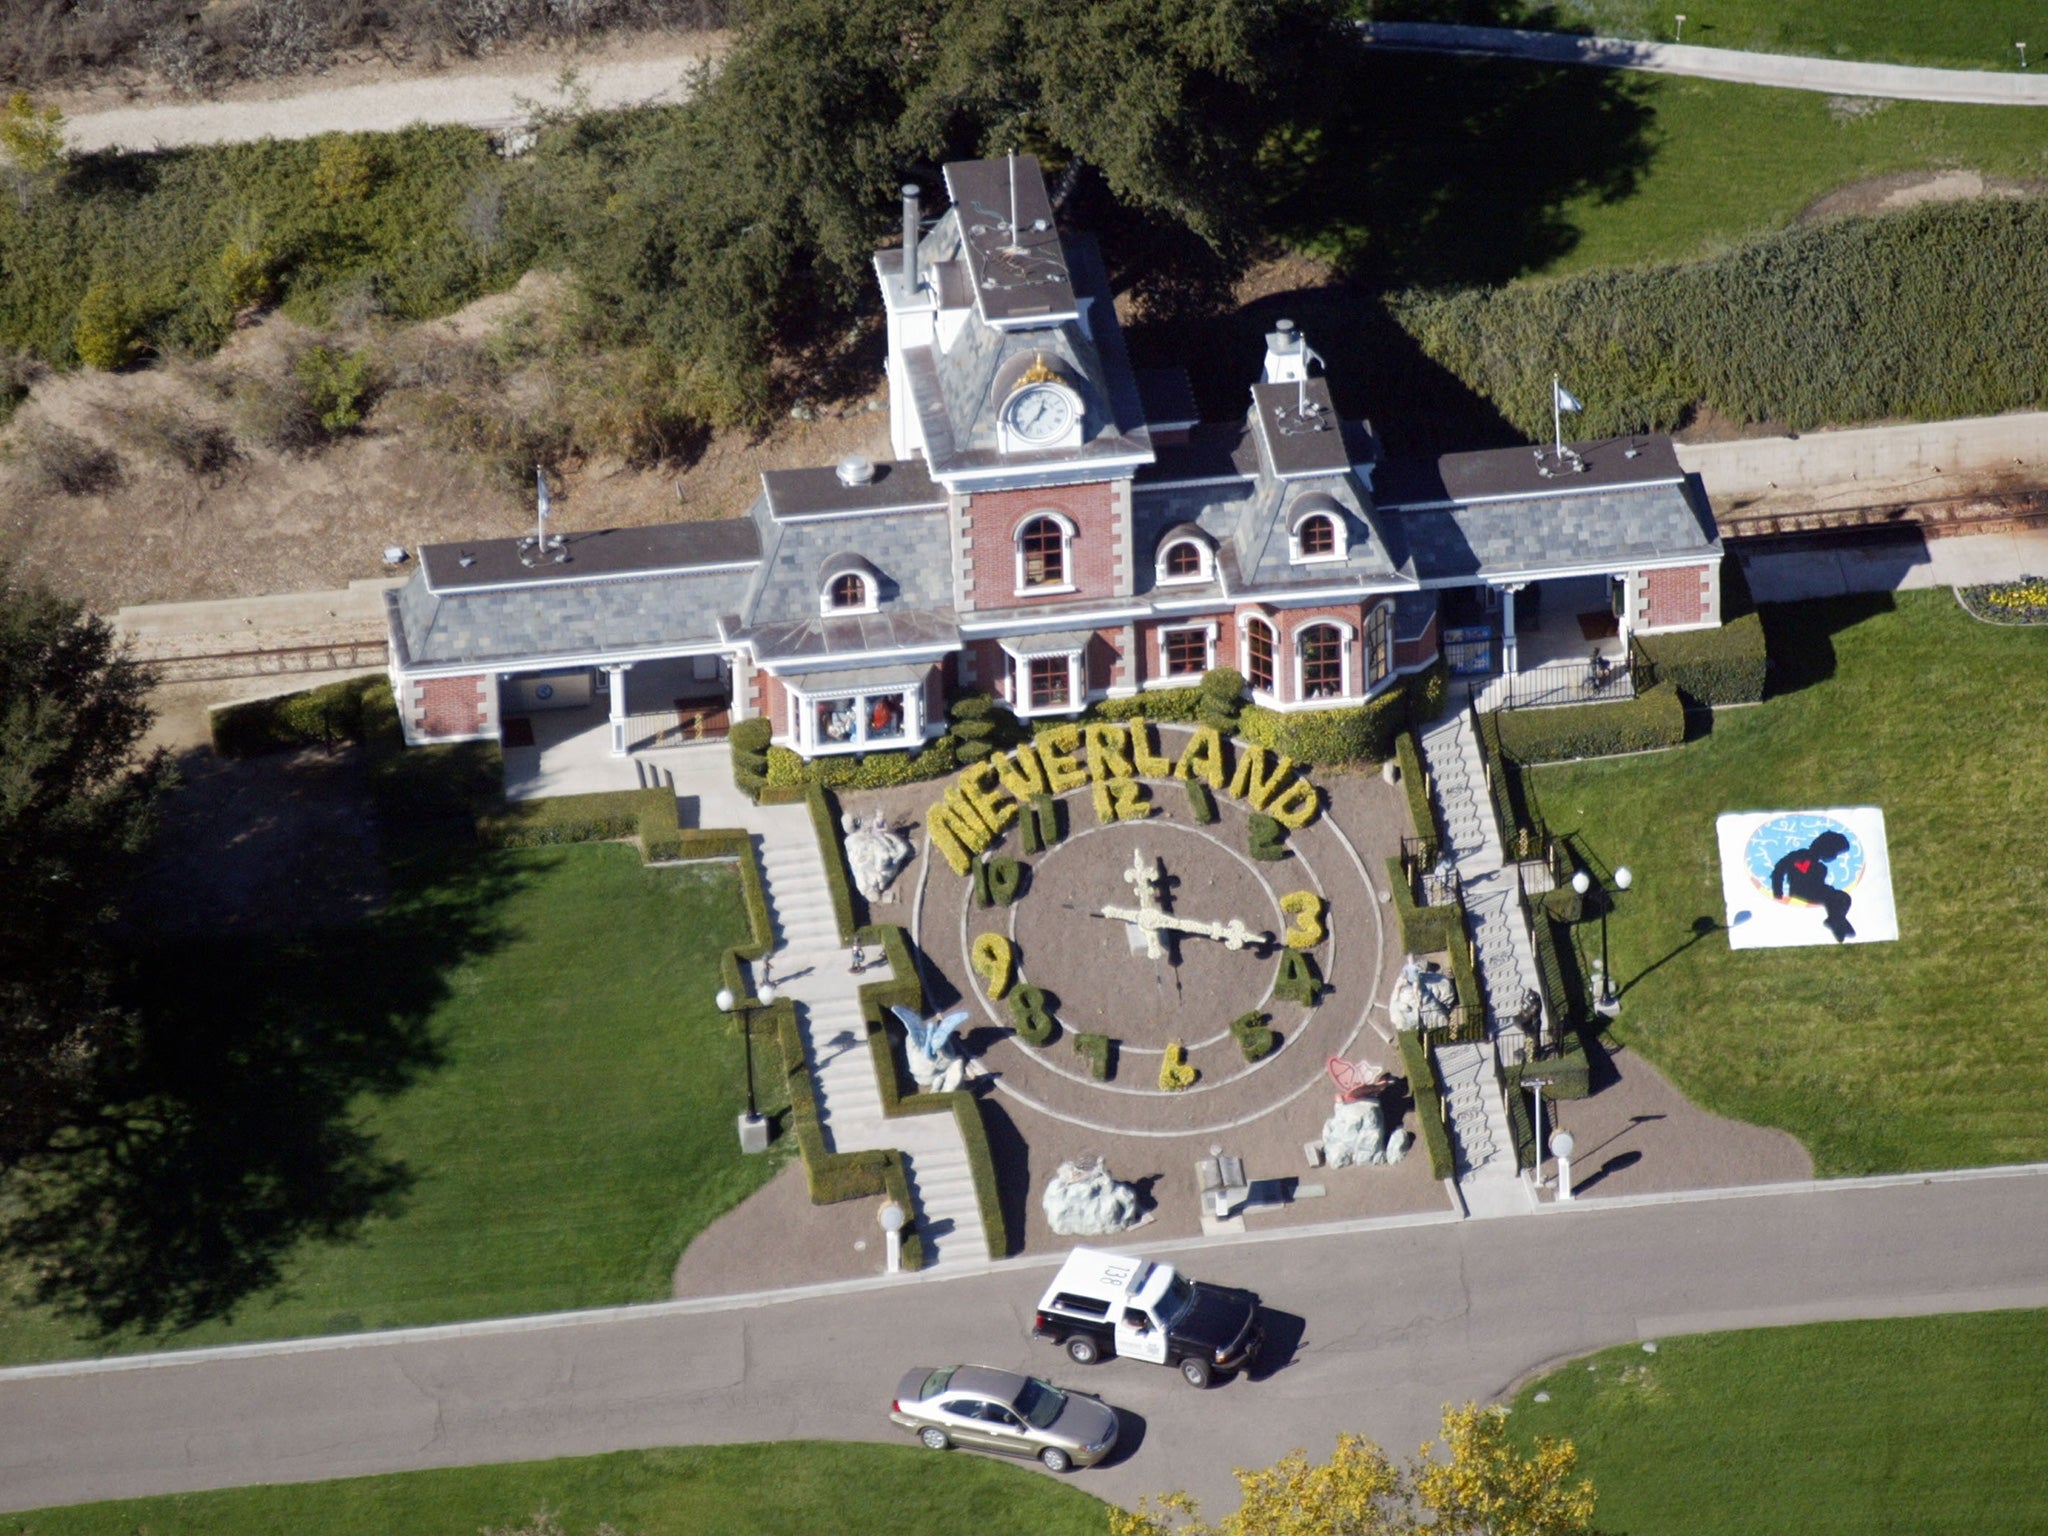 Neverland Ranch in its heyday